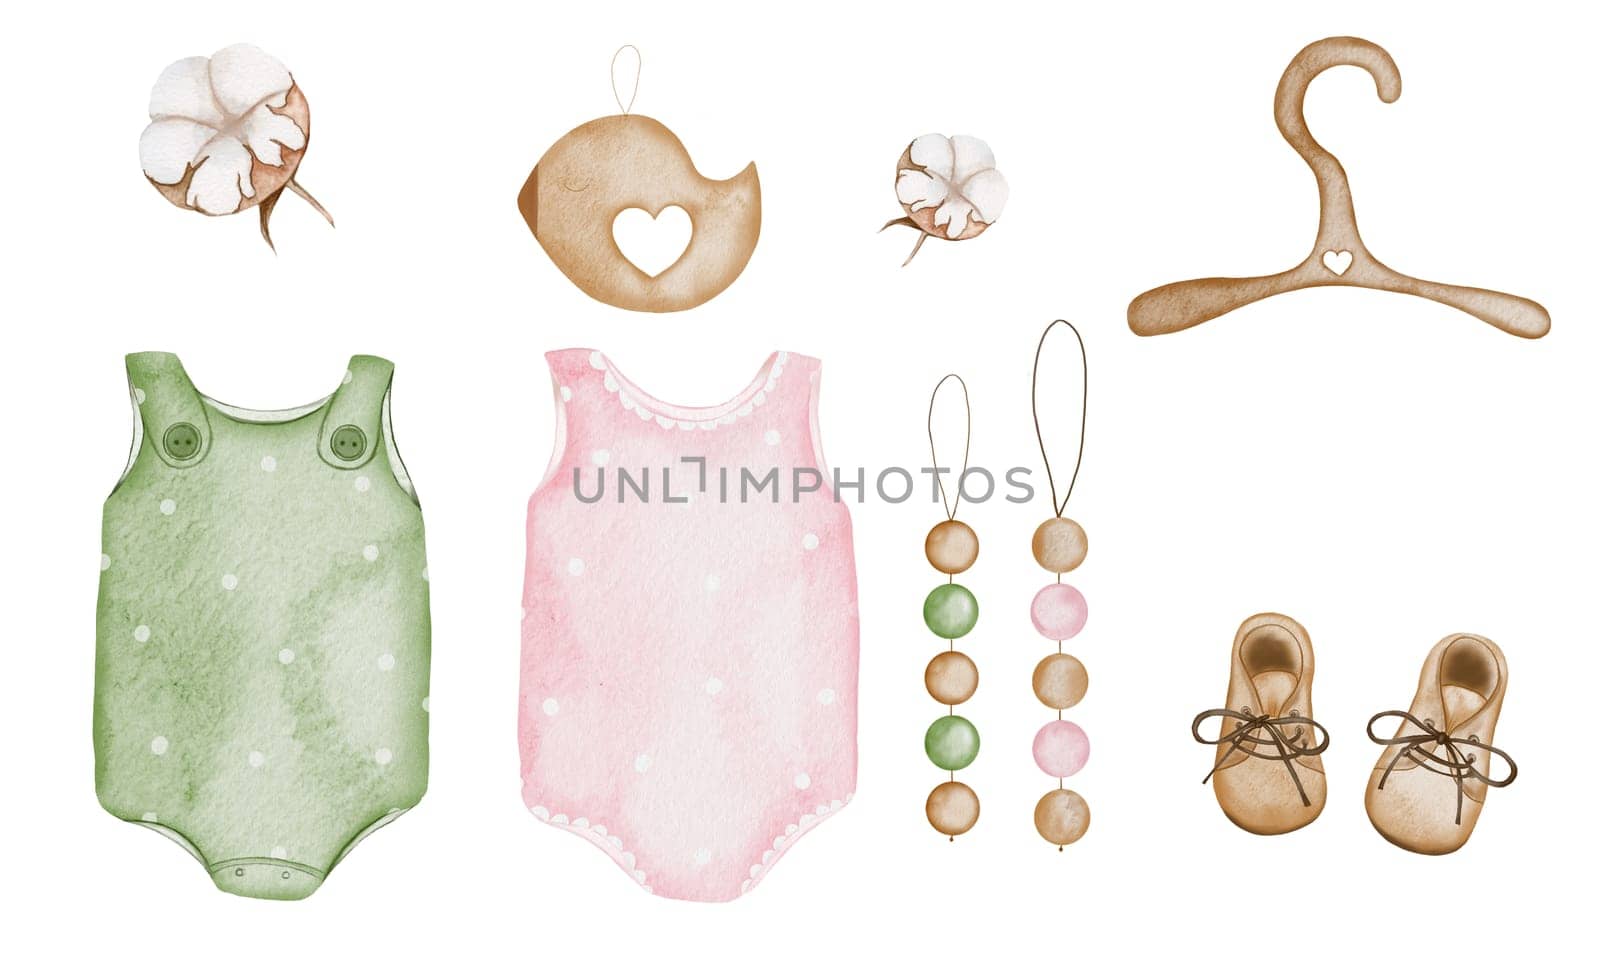 Watercolor set of cute baby items in boho style. Bodysuits and boots, wooden rattles, cotton flowers, a wooden bird and a hanger. Drawings on a white background isolate for the design of cards, banners and invitations for baby shower and the birth of a child. High quality photo